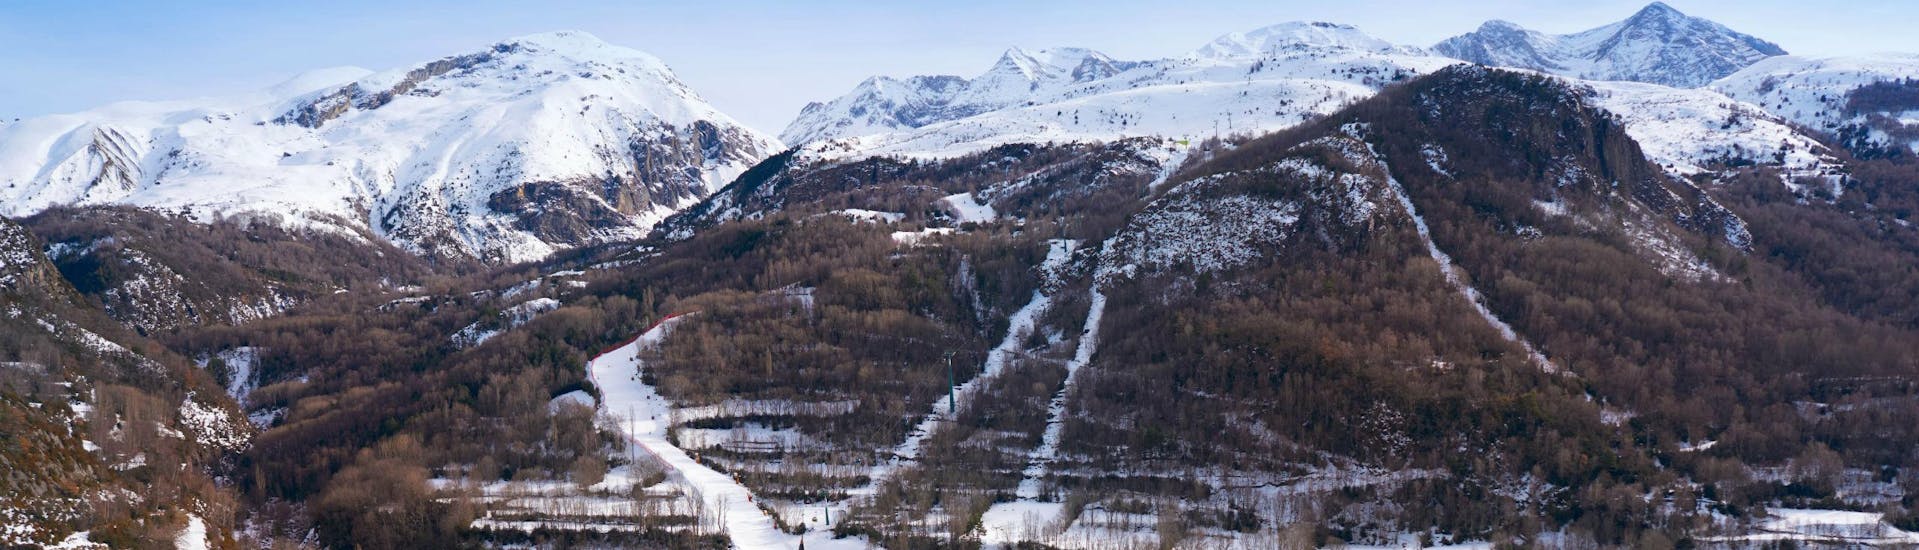 An image of the Spanish town of Panticosa, where local ski schools offer ski lessons for beginners who want to learn to ski.